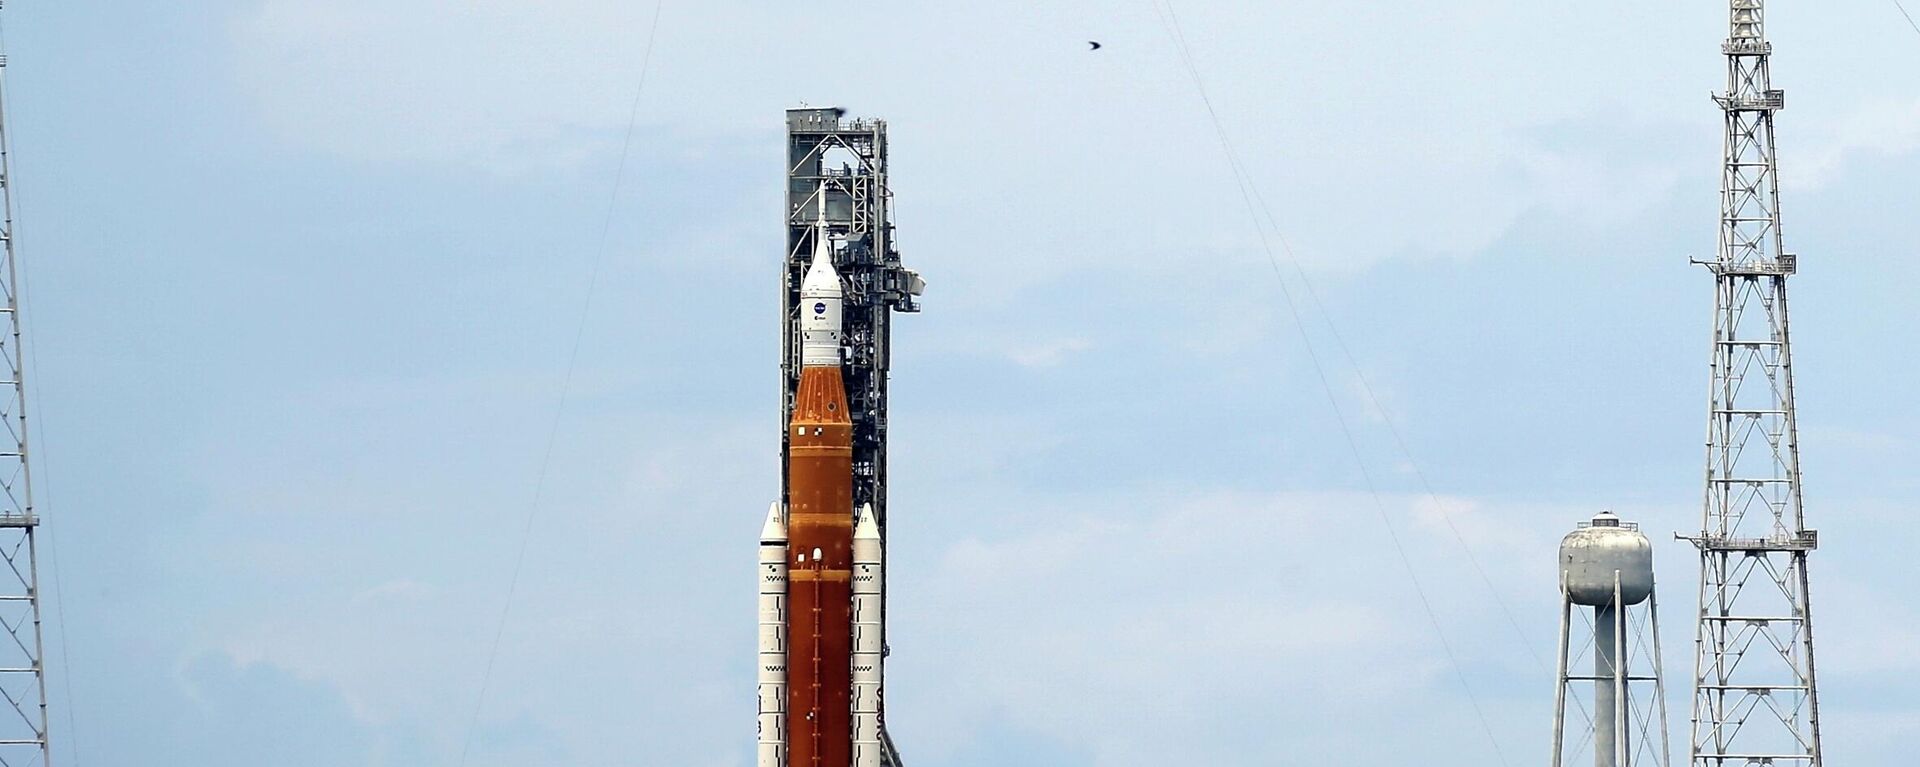 The NASA moon rocket stands ready less than 24 hours before it is scheduled to launch on Pad 39B for the Artemis 1 mission to orbit the moon at the Kennedy Space Center, Sunday, Aug. 28, 2022, in Cape Canaveral, Fla. - Sputnik International, 1920, 29.08.2022